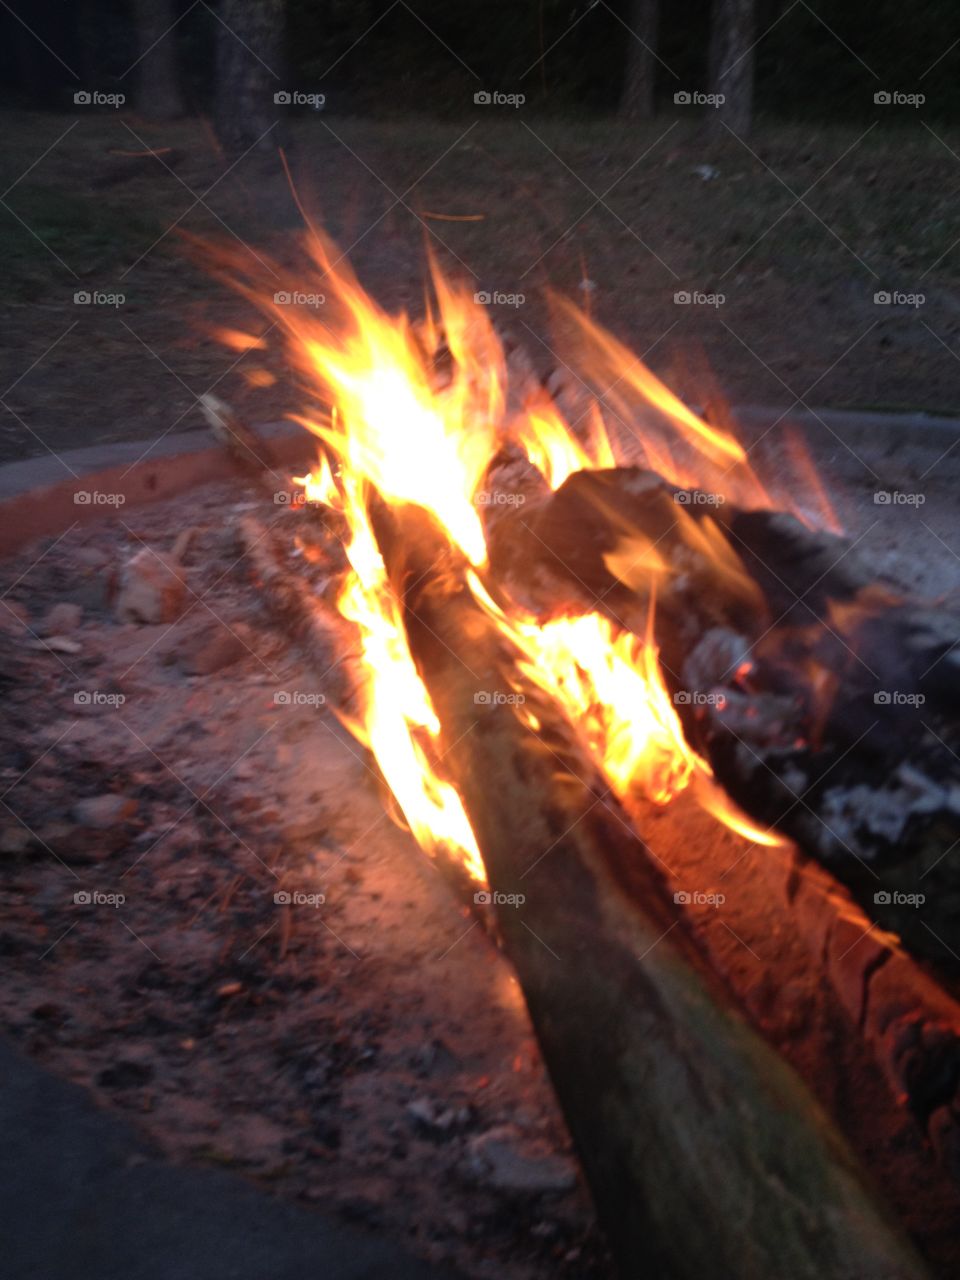 flames on the campfire with visible wood logs from the forest